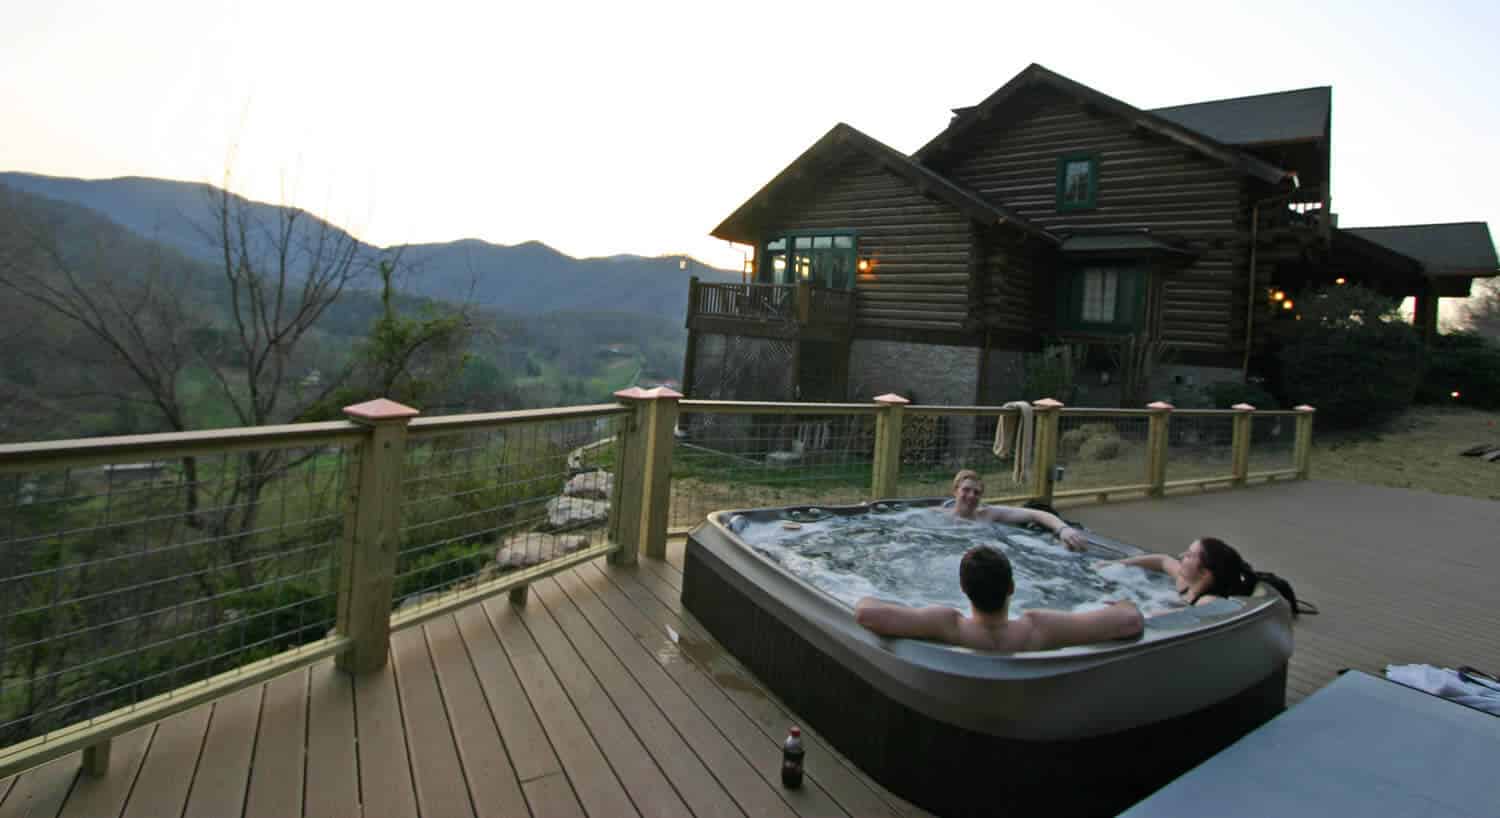 Three people relax in a hot tub on a deck overlooking a mountain valley. 